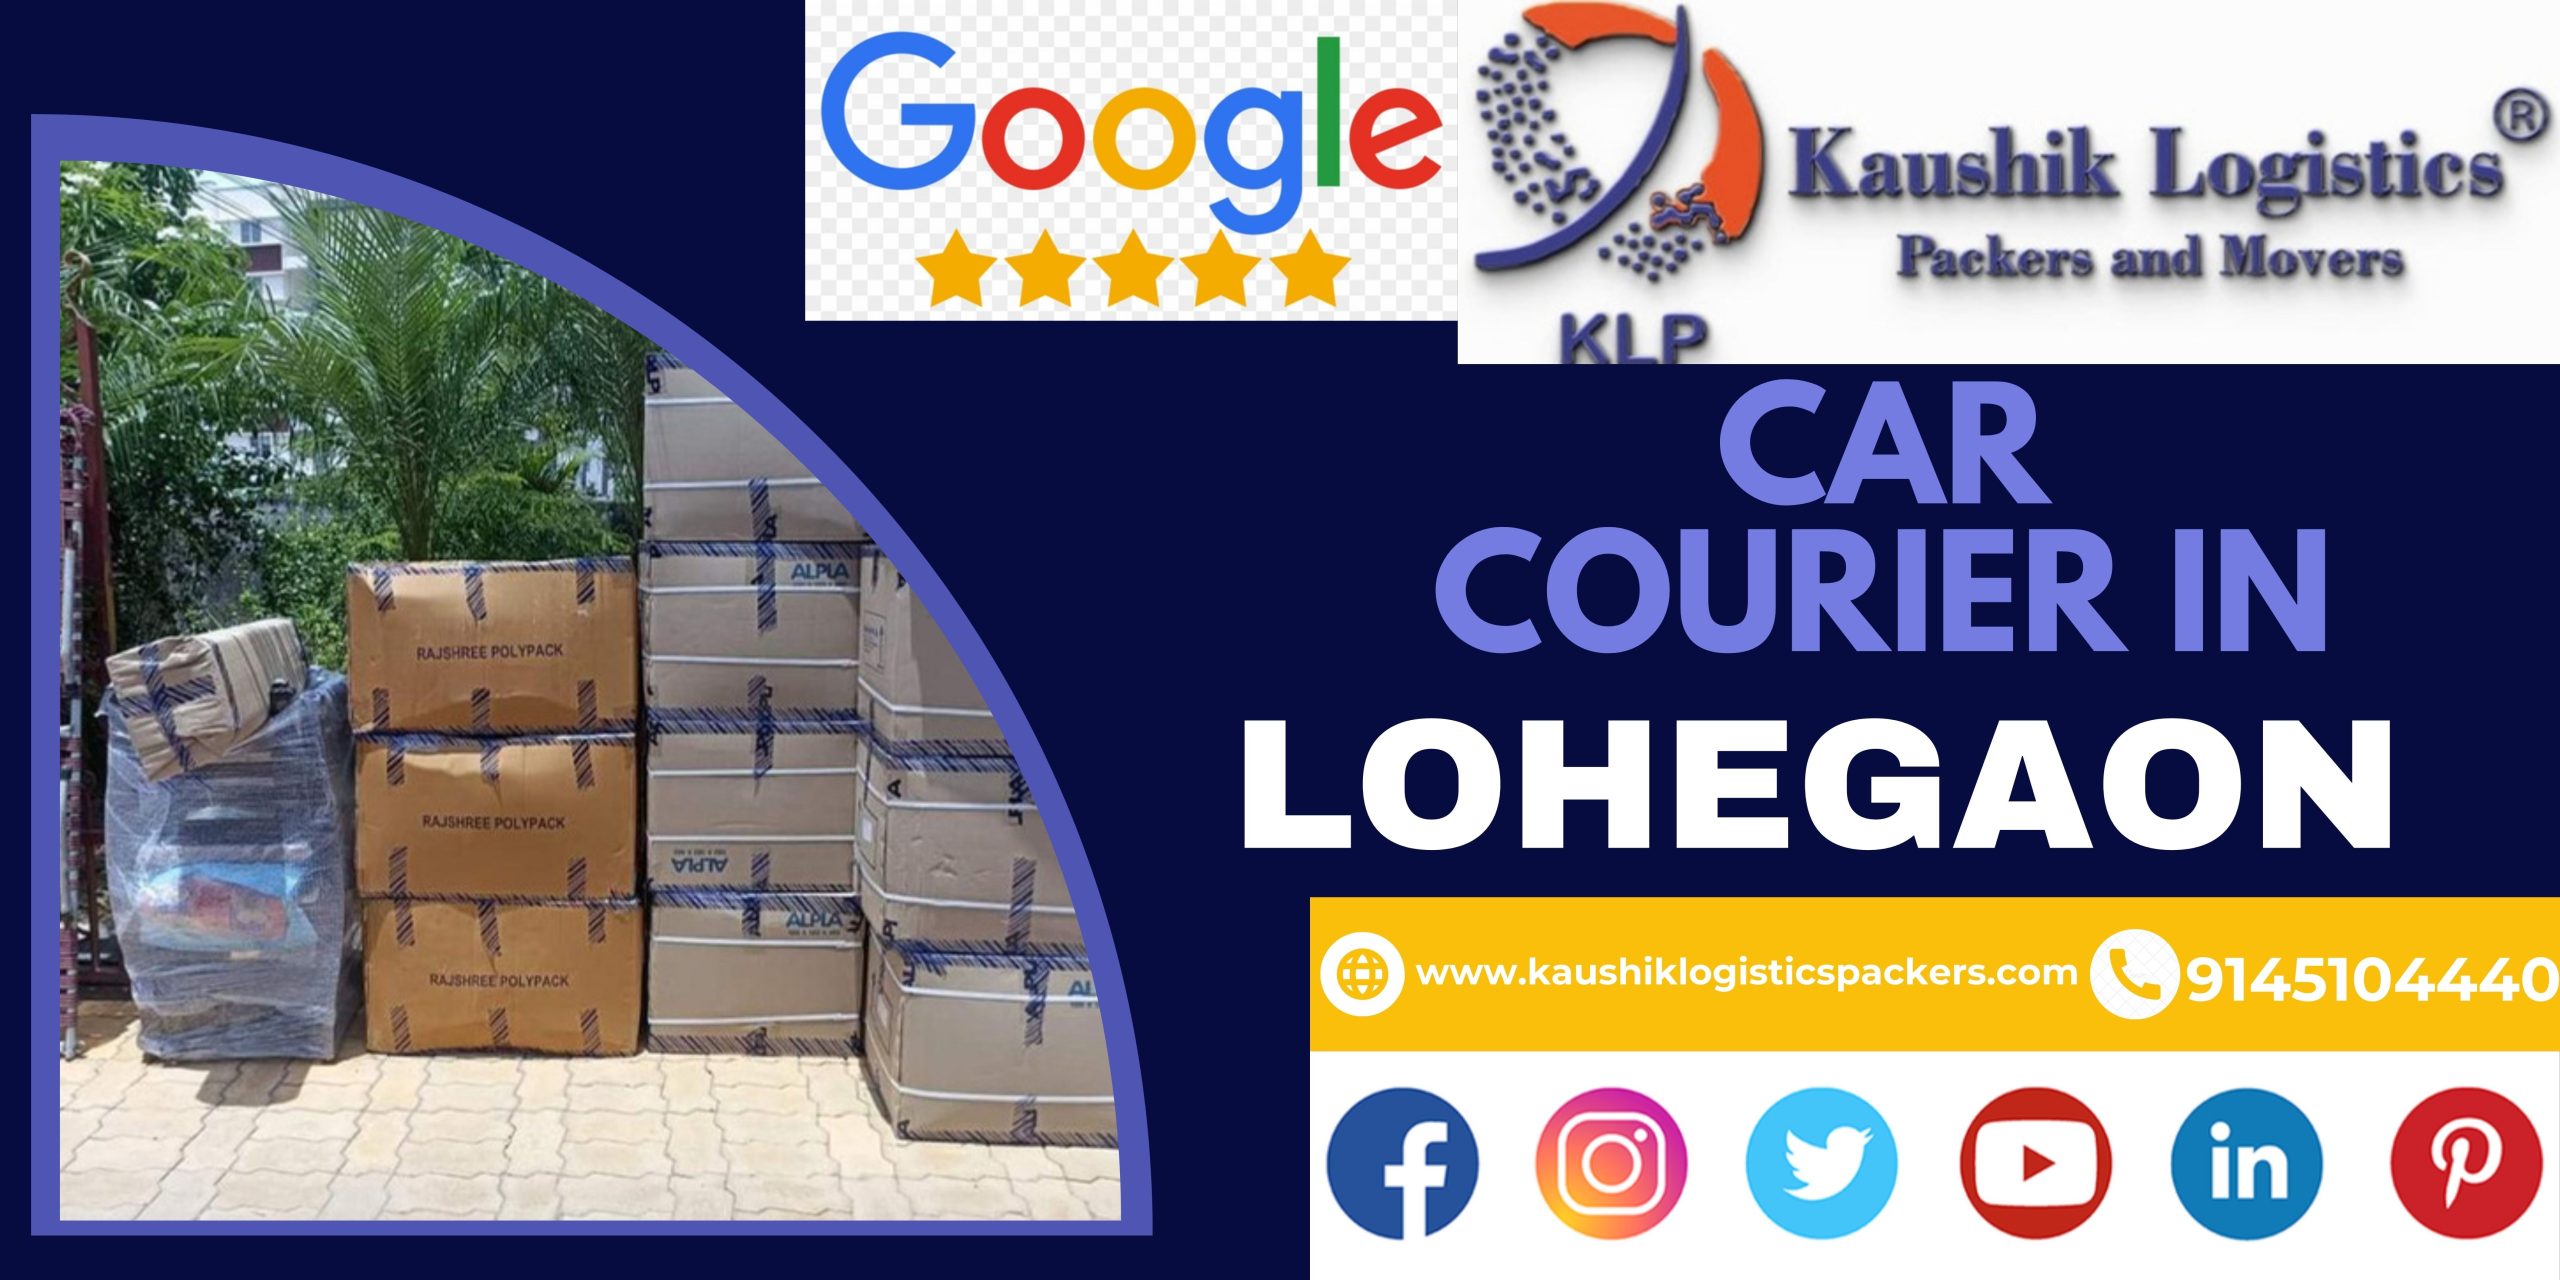 Packers and Movers In Lohegaon